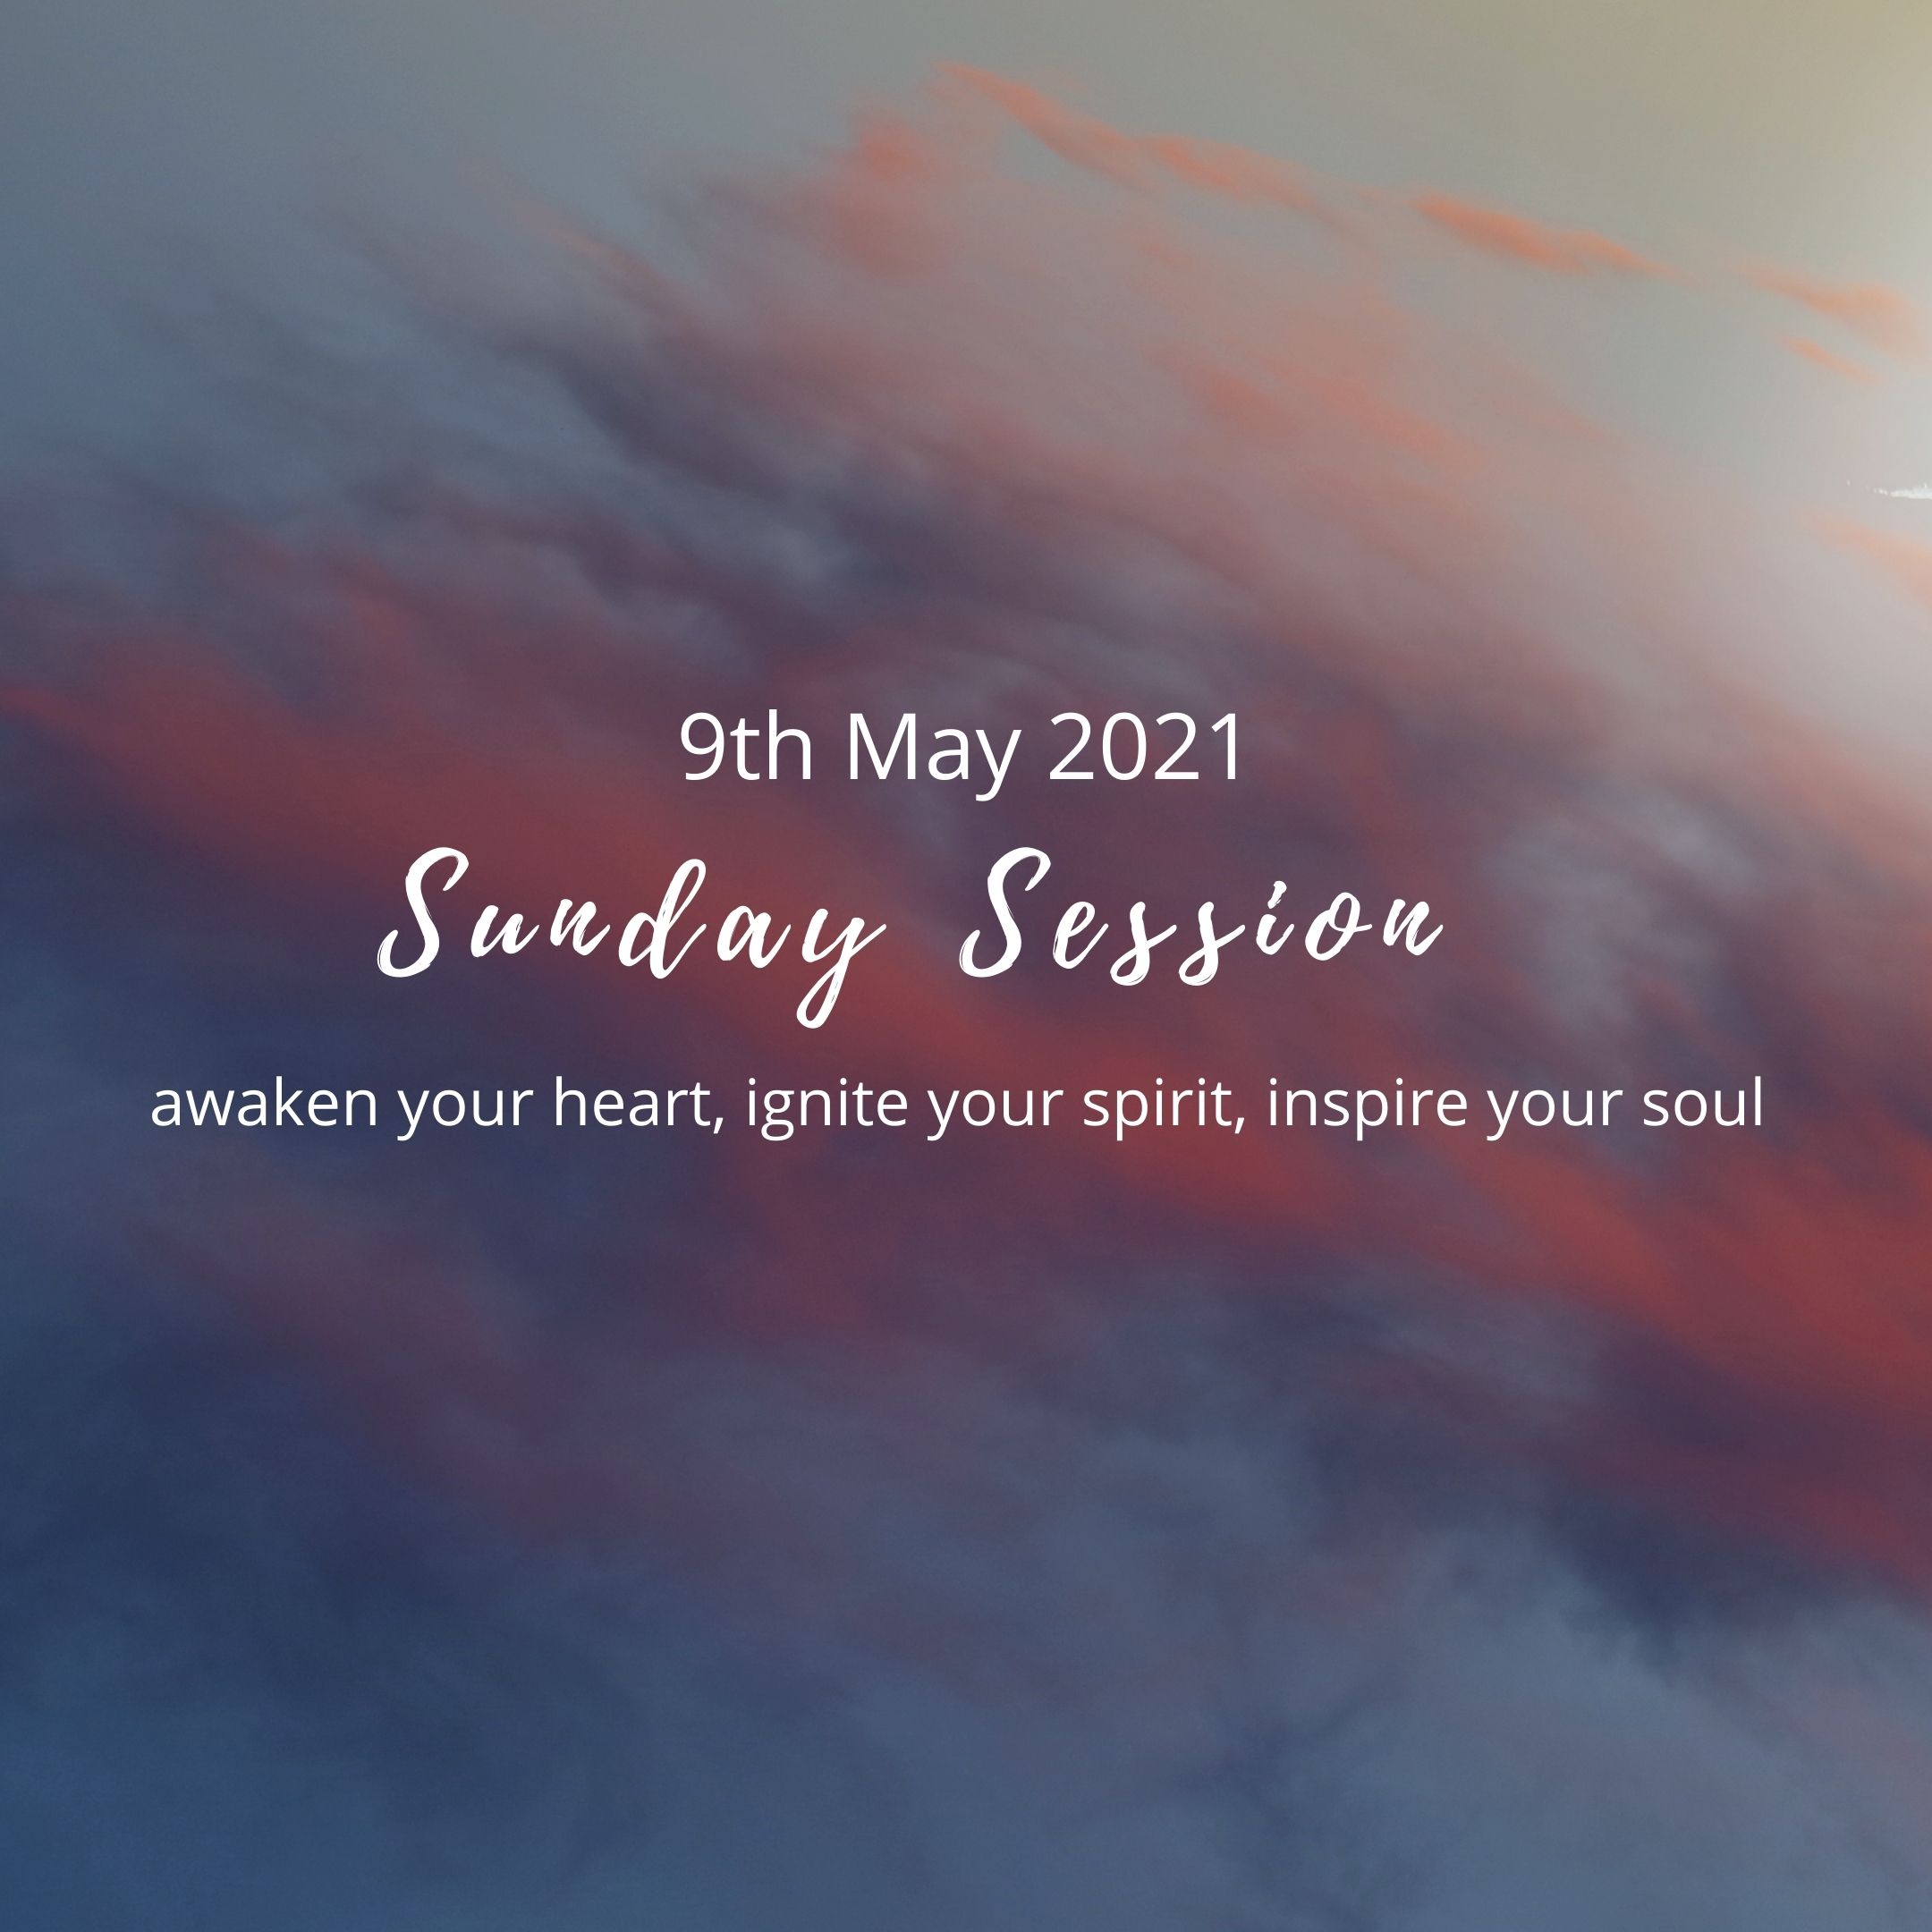 Sunday Session 9th May 2021